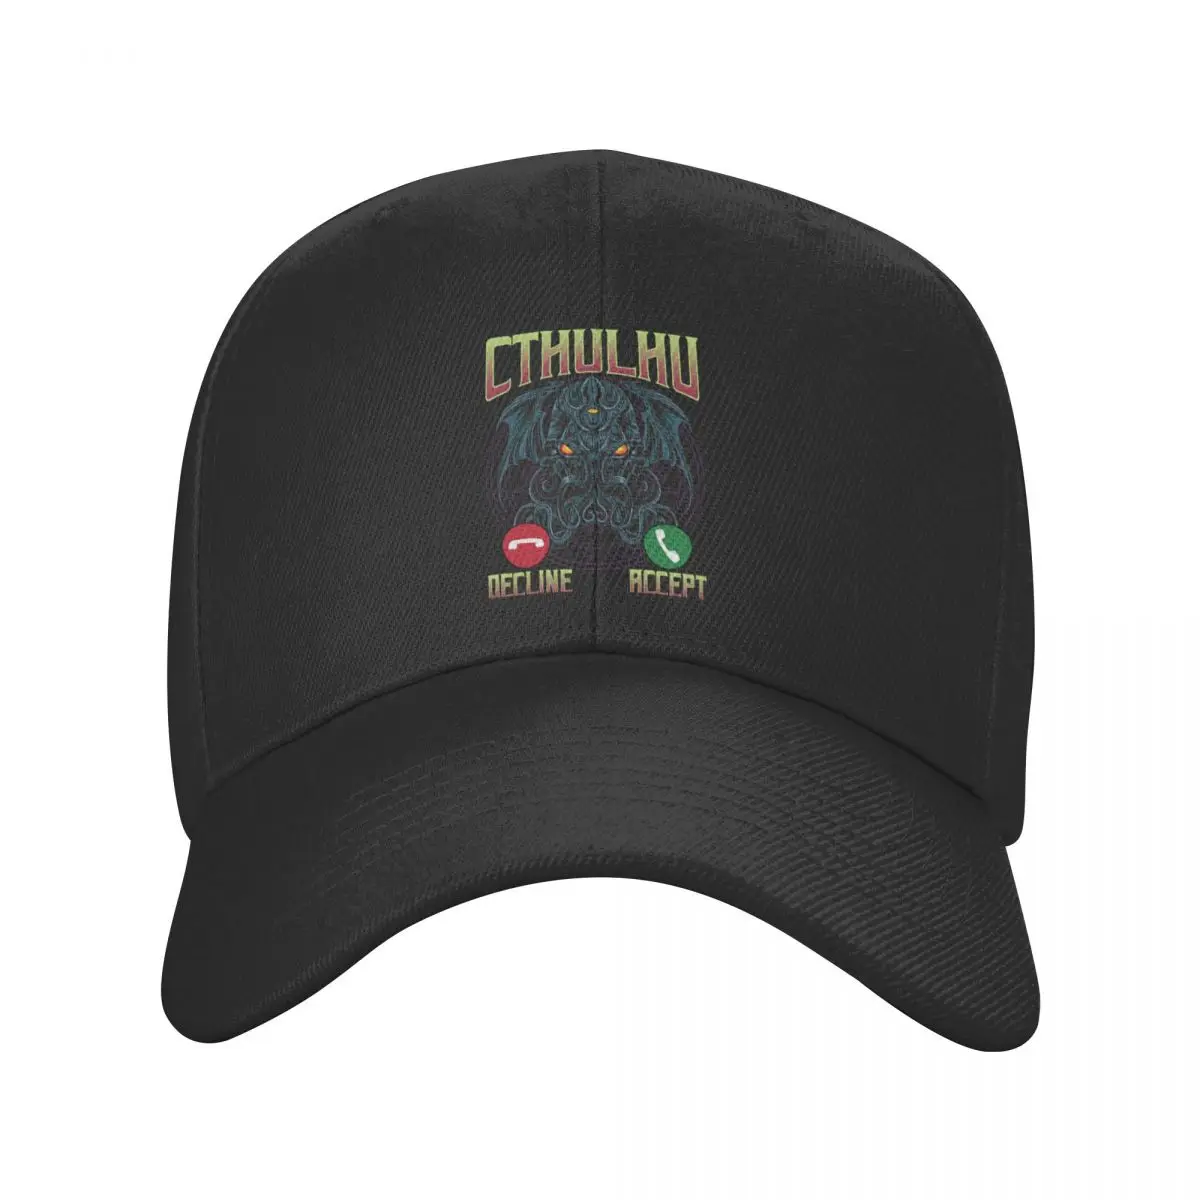 

New The Call Of Cthulhu Baseball Cap Adult Dark Occult Mythical Monster Adjustable Dad Hat Women Men Sports Snapback Caps